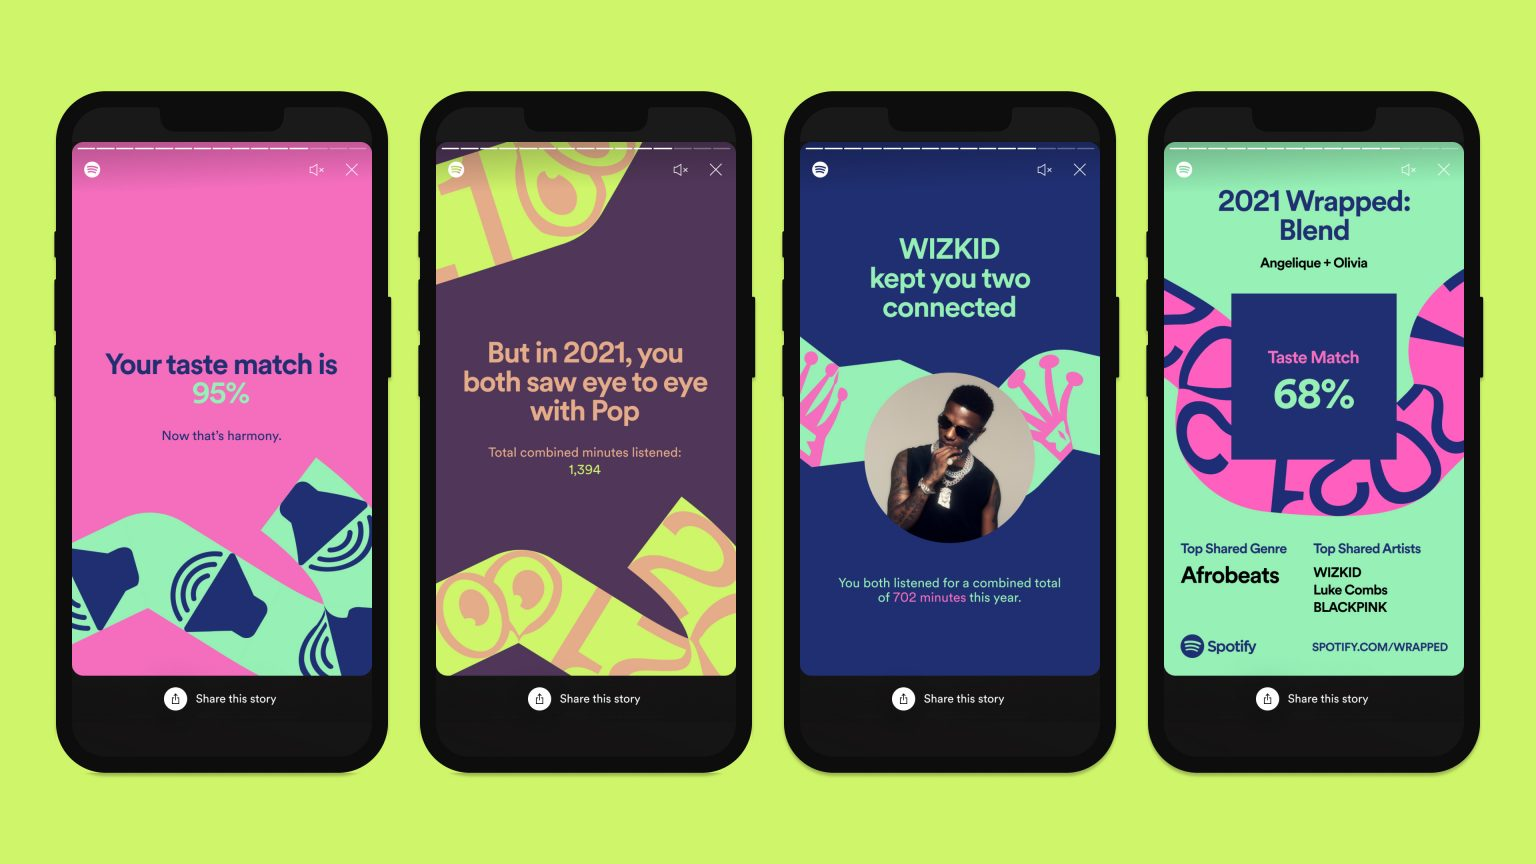 Spotify content marketing campaign